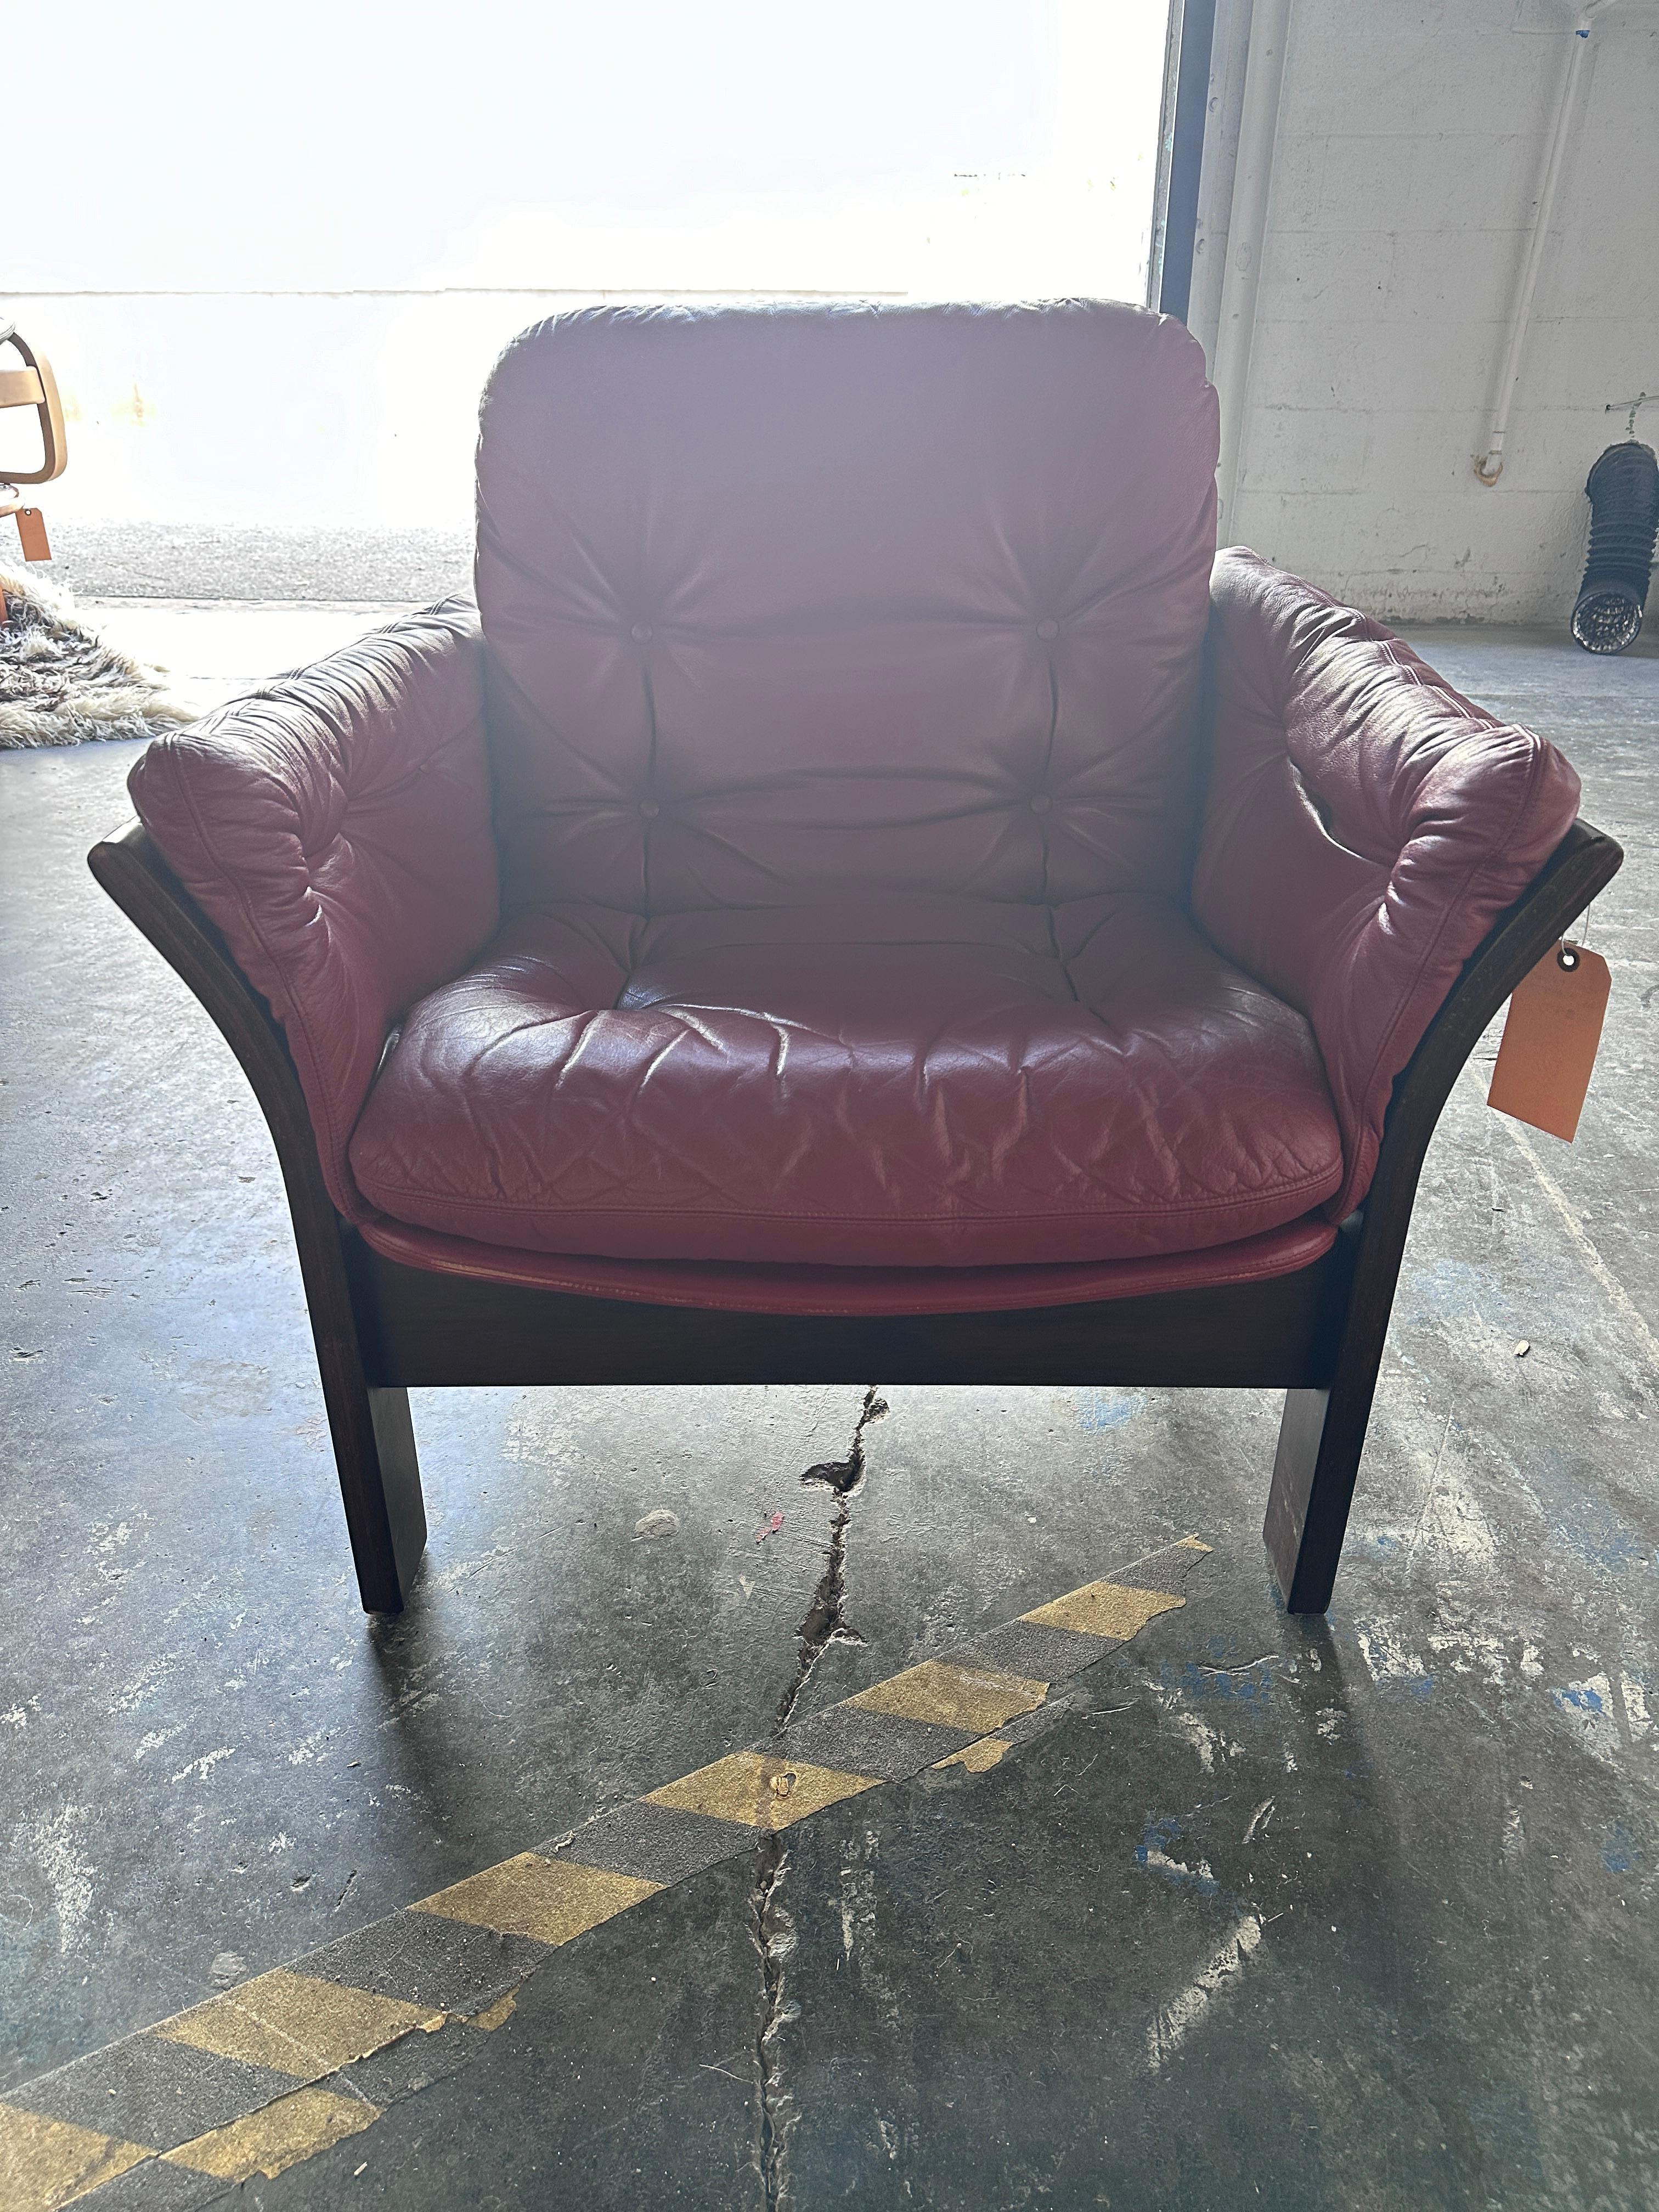 Deep red leather and suede chair by Thams Kvalitet. Features a wooden frame. In excellent condition with minimal age-consistent wear. Labeled.